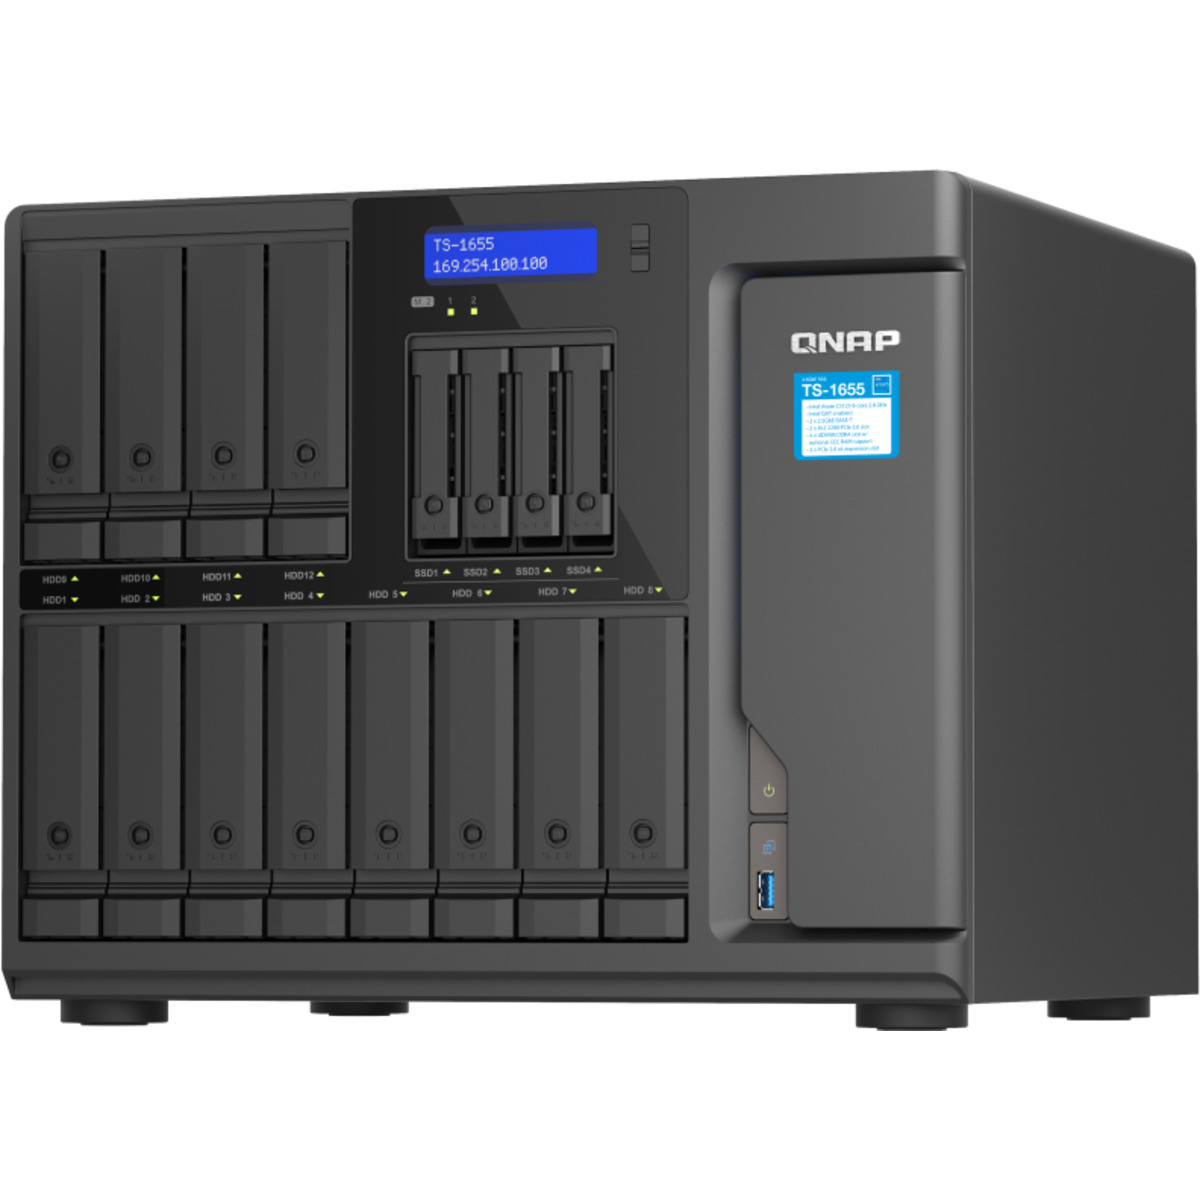 buy $8562 QNAP TS-1655 264tb Desktop NAS - Network Attached Storage Device 12x22000gb Seagate IronWolf Pro ST22000NT001 3.5 7200rpm SATA 6Gb/s HDD NAS Class Drives Installed - Burn-In Tested - FREE RAM UPGRADE - nas headquarters buy network attached storage server device das new raid-5 free shipping simply usa TS-1655